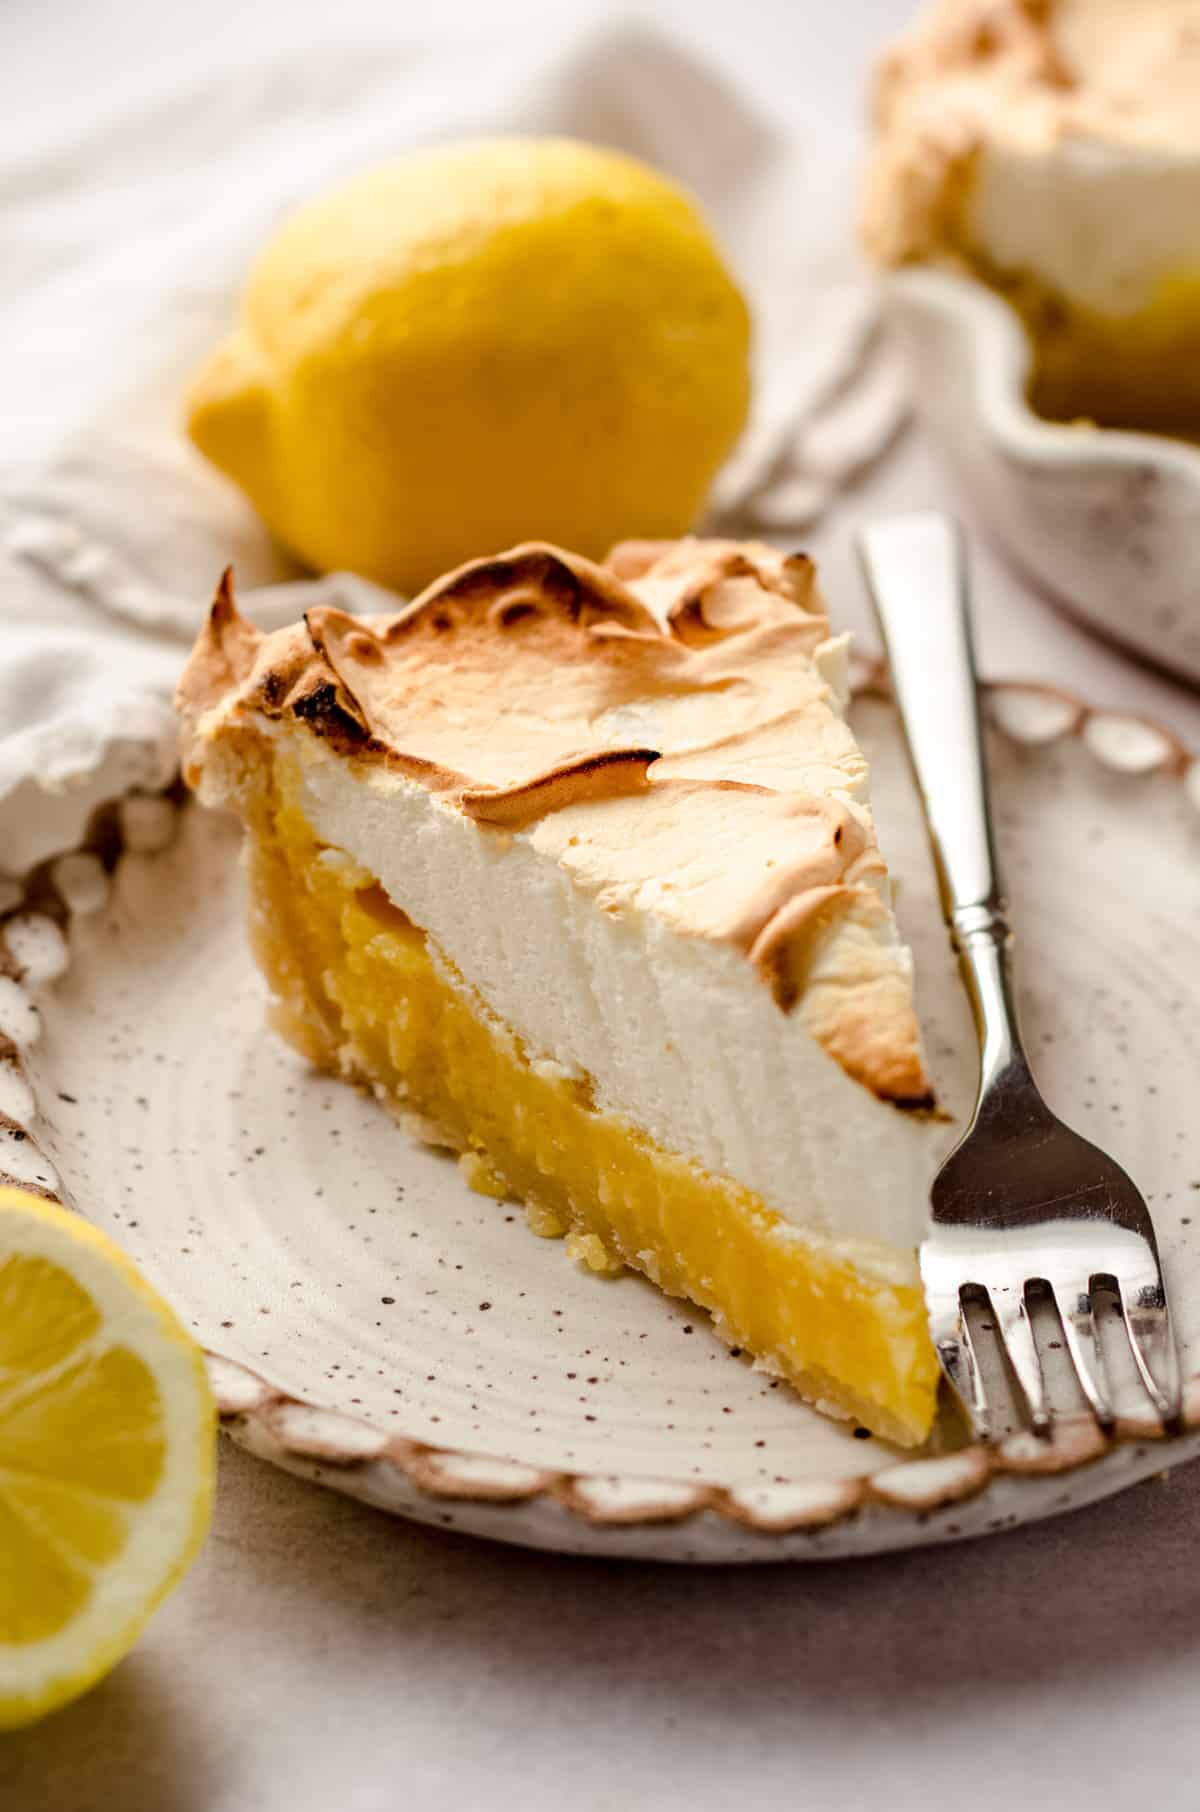 A slice ofThis classic lemon meringue pie recipe features a sweet and tart homemade lemon curd filling and a light and fluffy meringue topping. Bake this lemon meringue pie in the oven to insure the filling sets and creates a beautiful and impressive dessert with clear, sturdy, defined layers. lemon meringue pie on a plate, with a fork on the side.